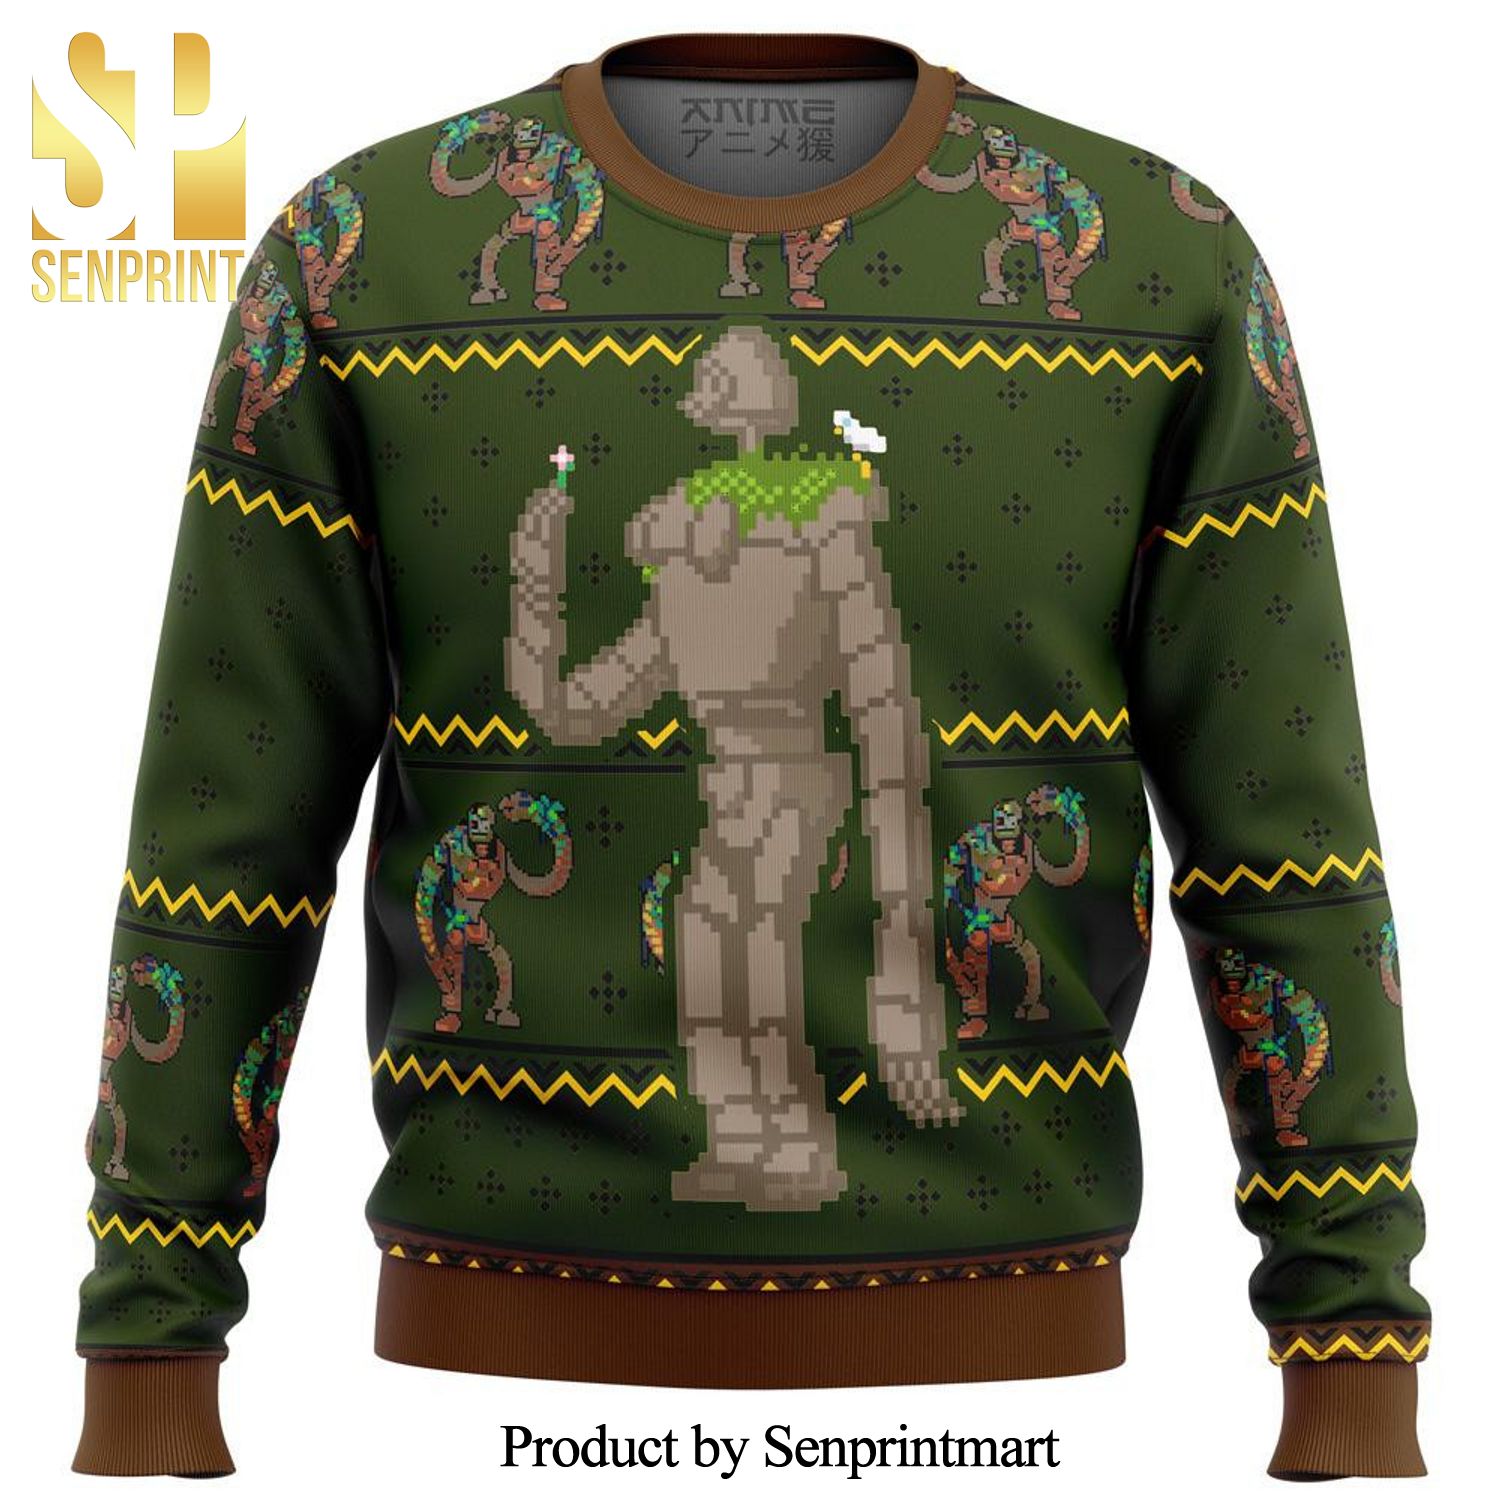 Castle In The Sky Laputan Robot Soldier Premium Manga Anime Knitted Ugly Christmas Sweater